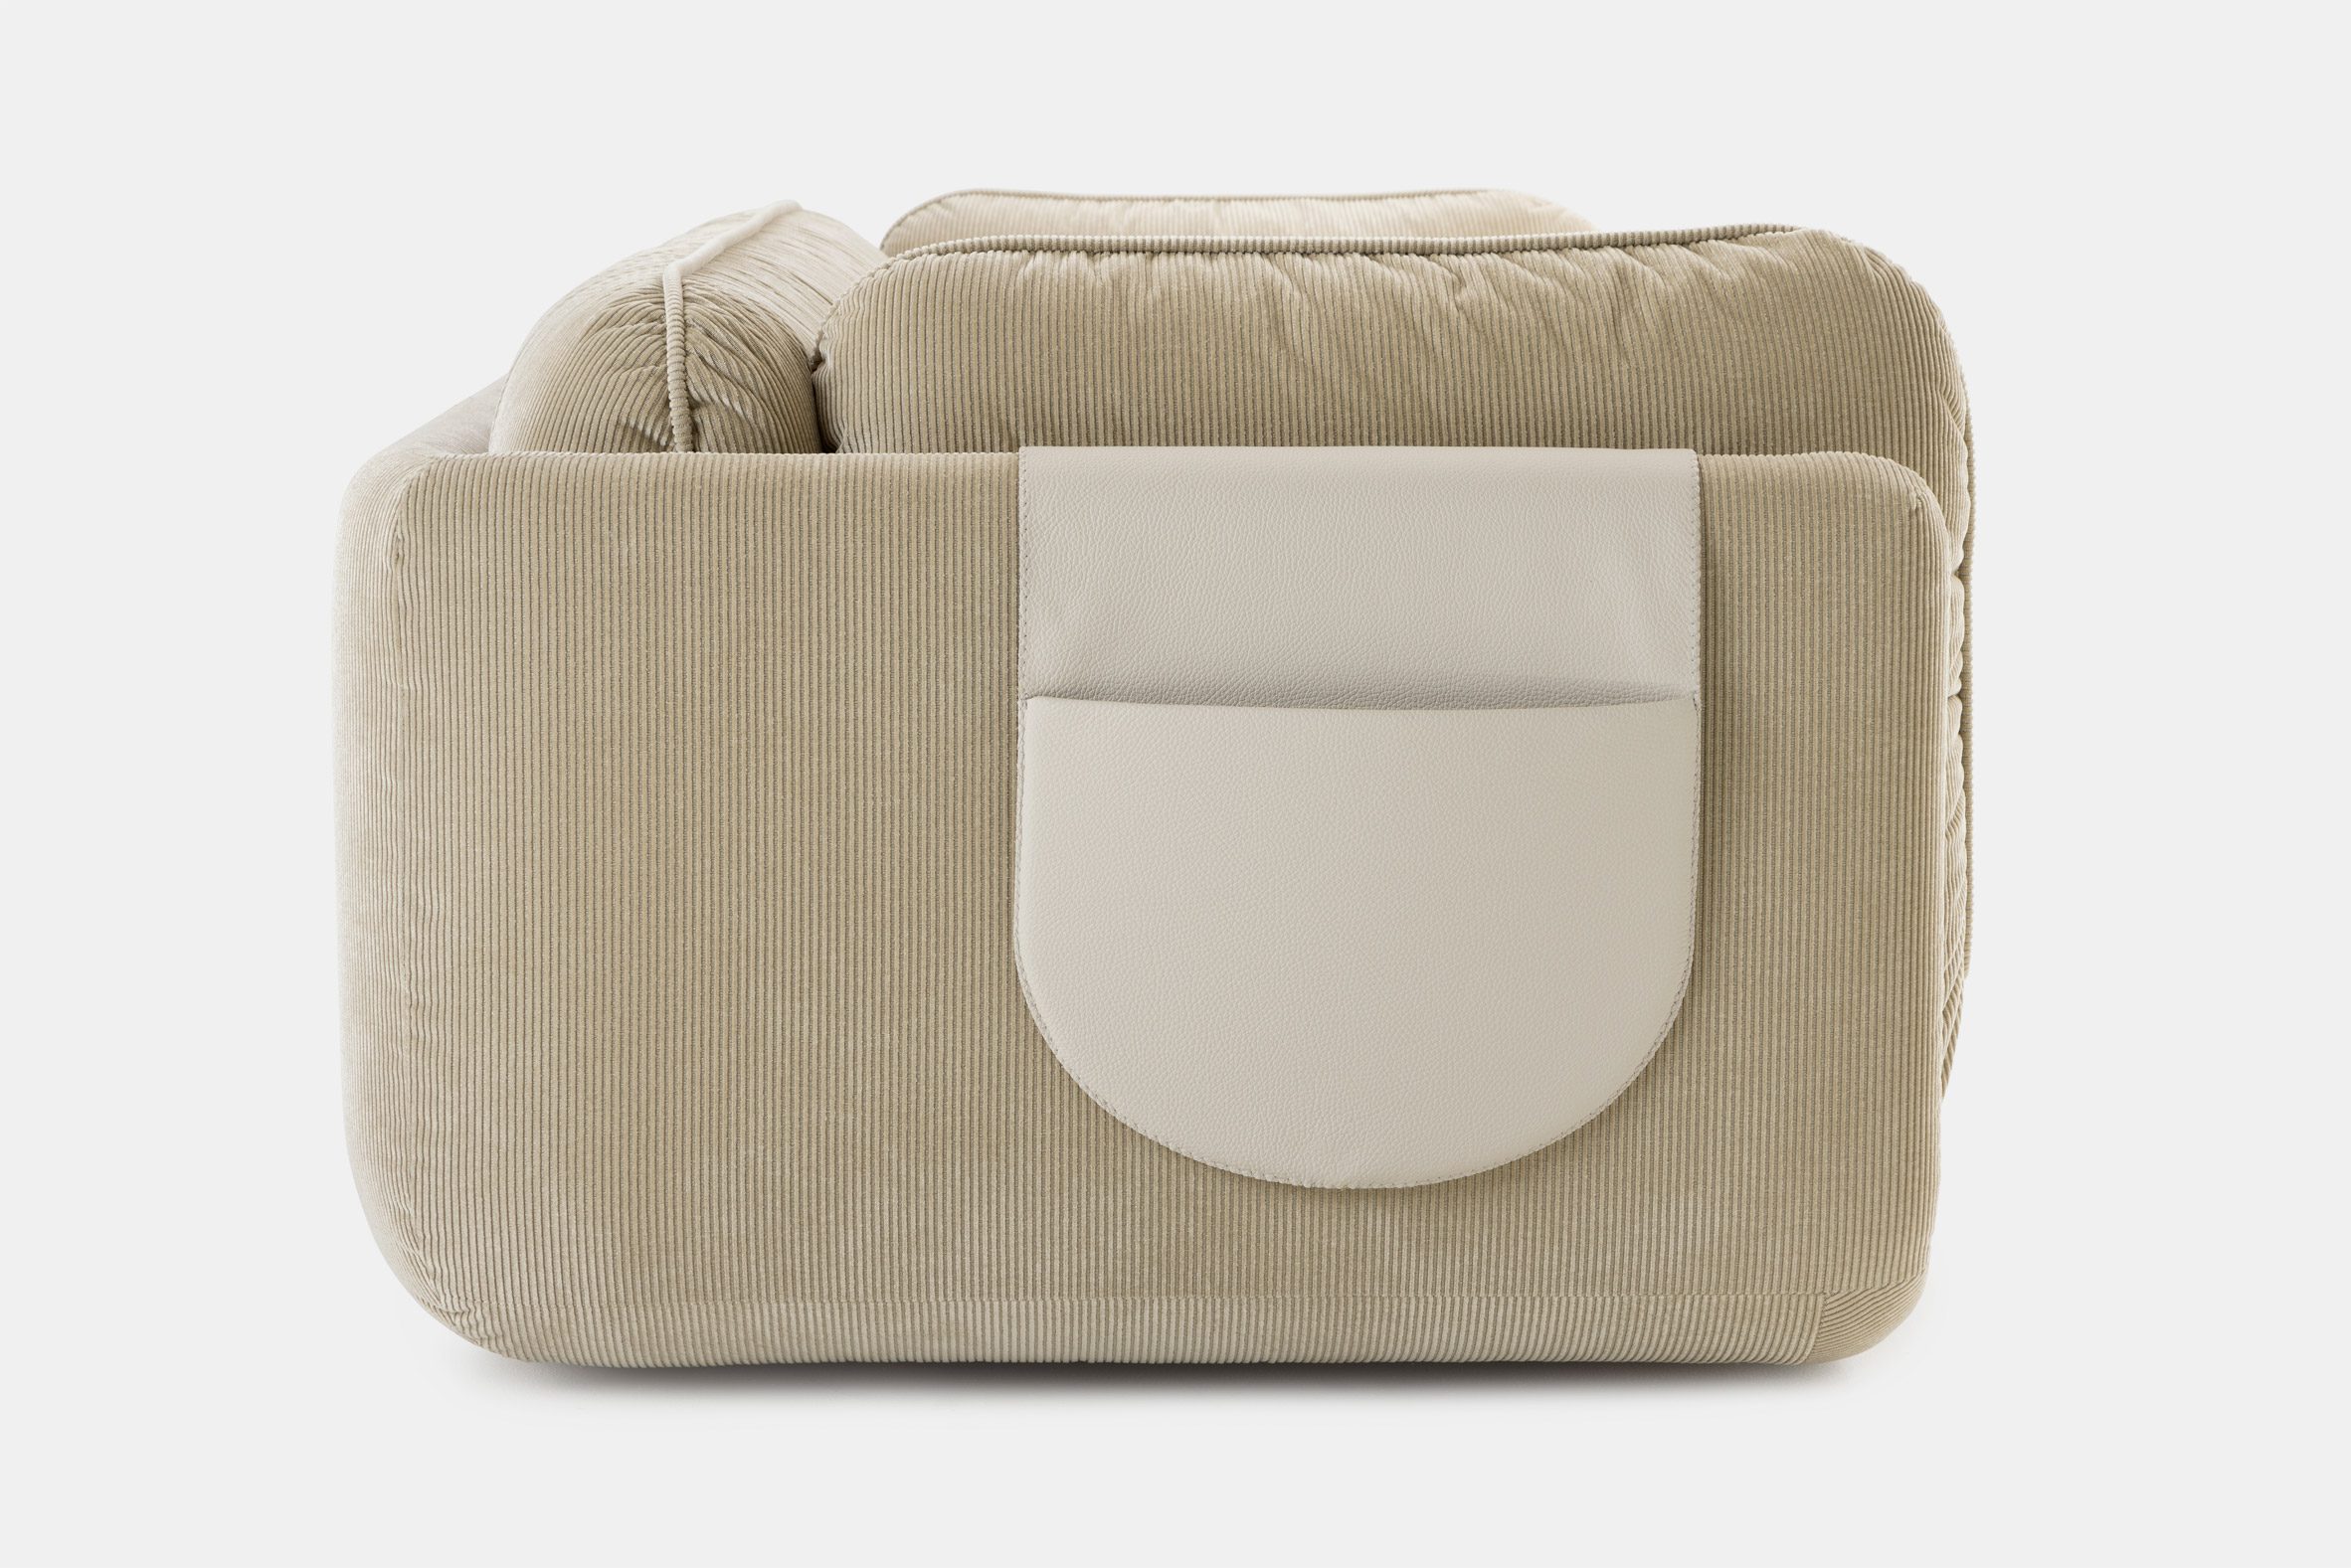 Beige three-seater Lunetta sofa by Leolux with a side pocket